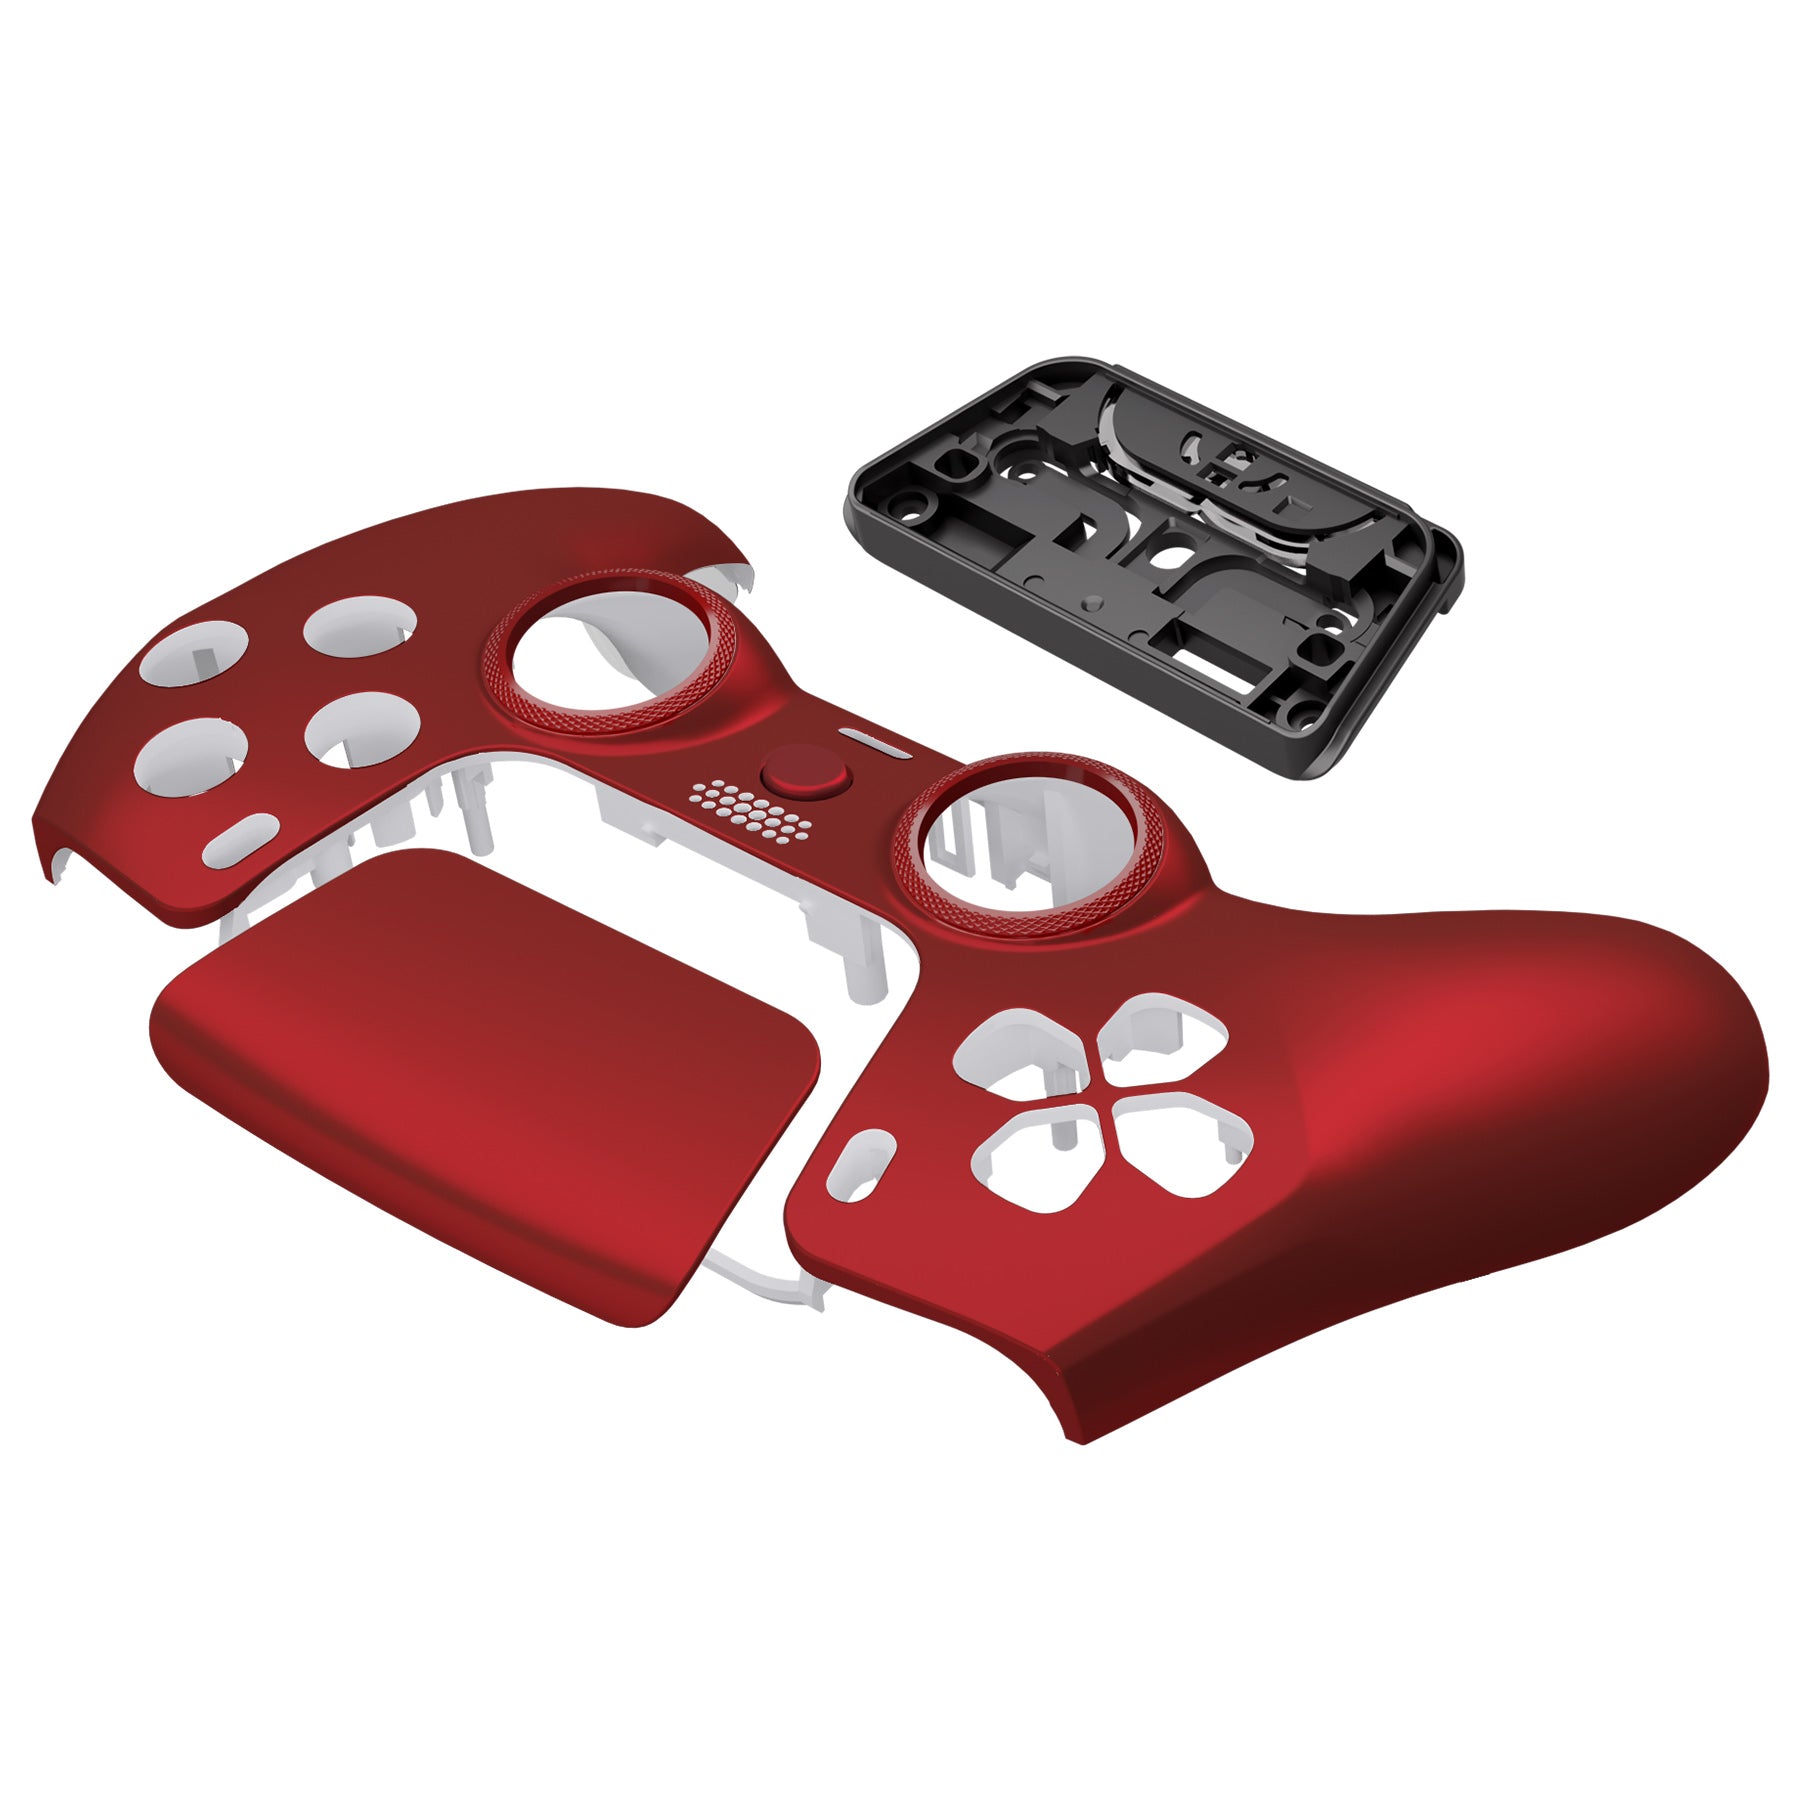 RED EXTREME PS5 SMART PRO MODDED CONTROLLER